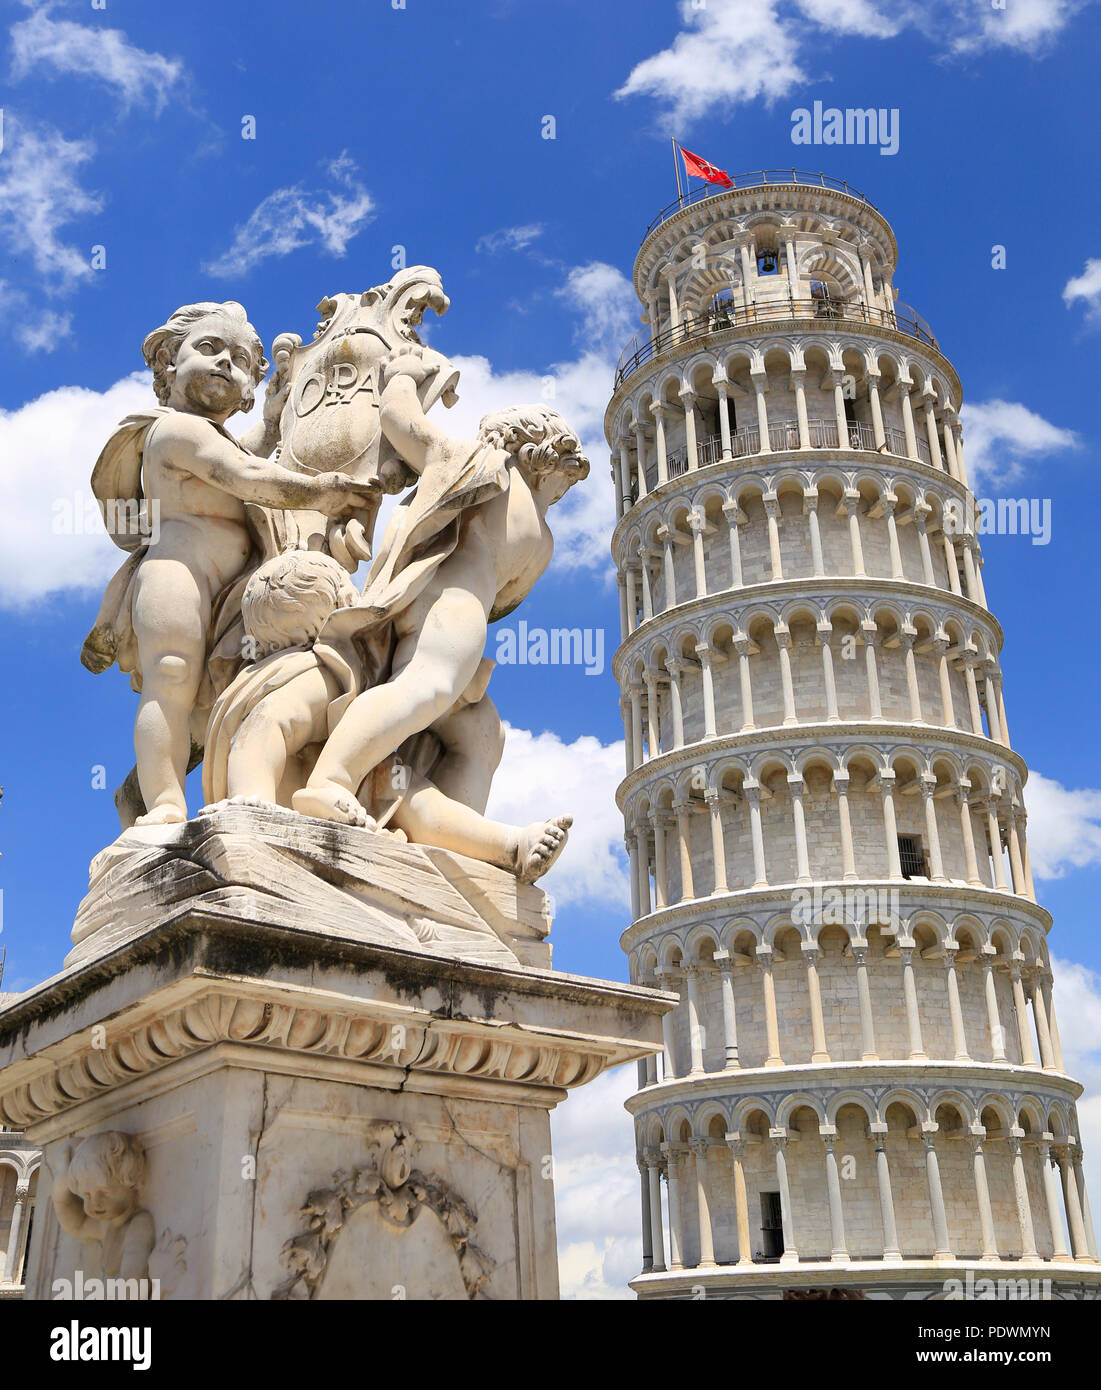 The Leaning Tower of Pisa, Italy Stock Photo